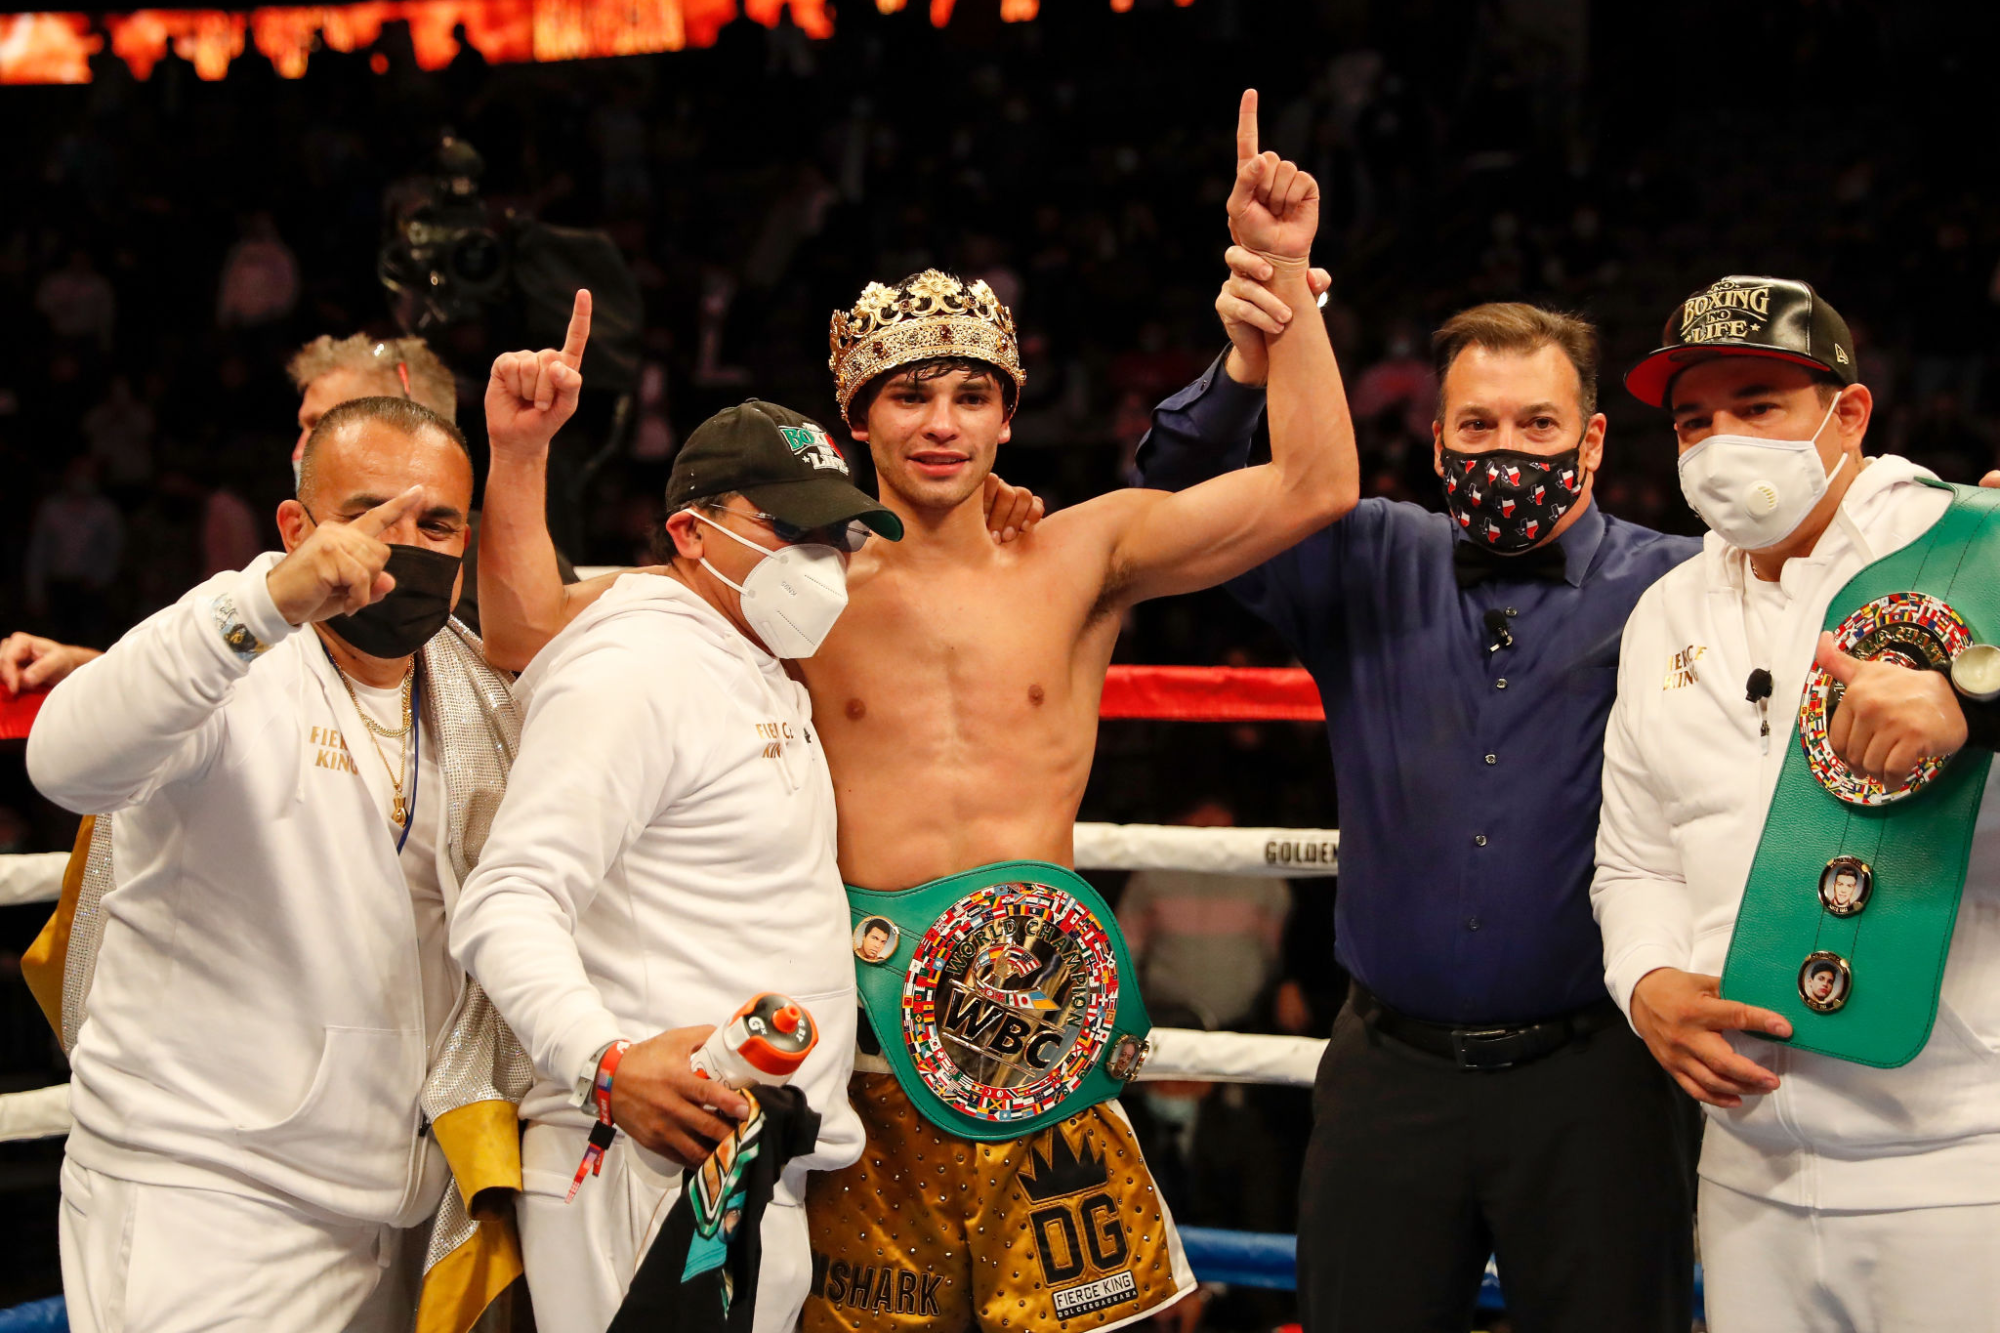 In the ring, Ryan Garcia smiles and raises in arms in victory after defeating Luke Campbell in a WBC title fight